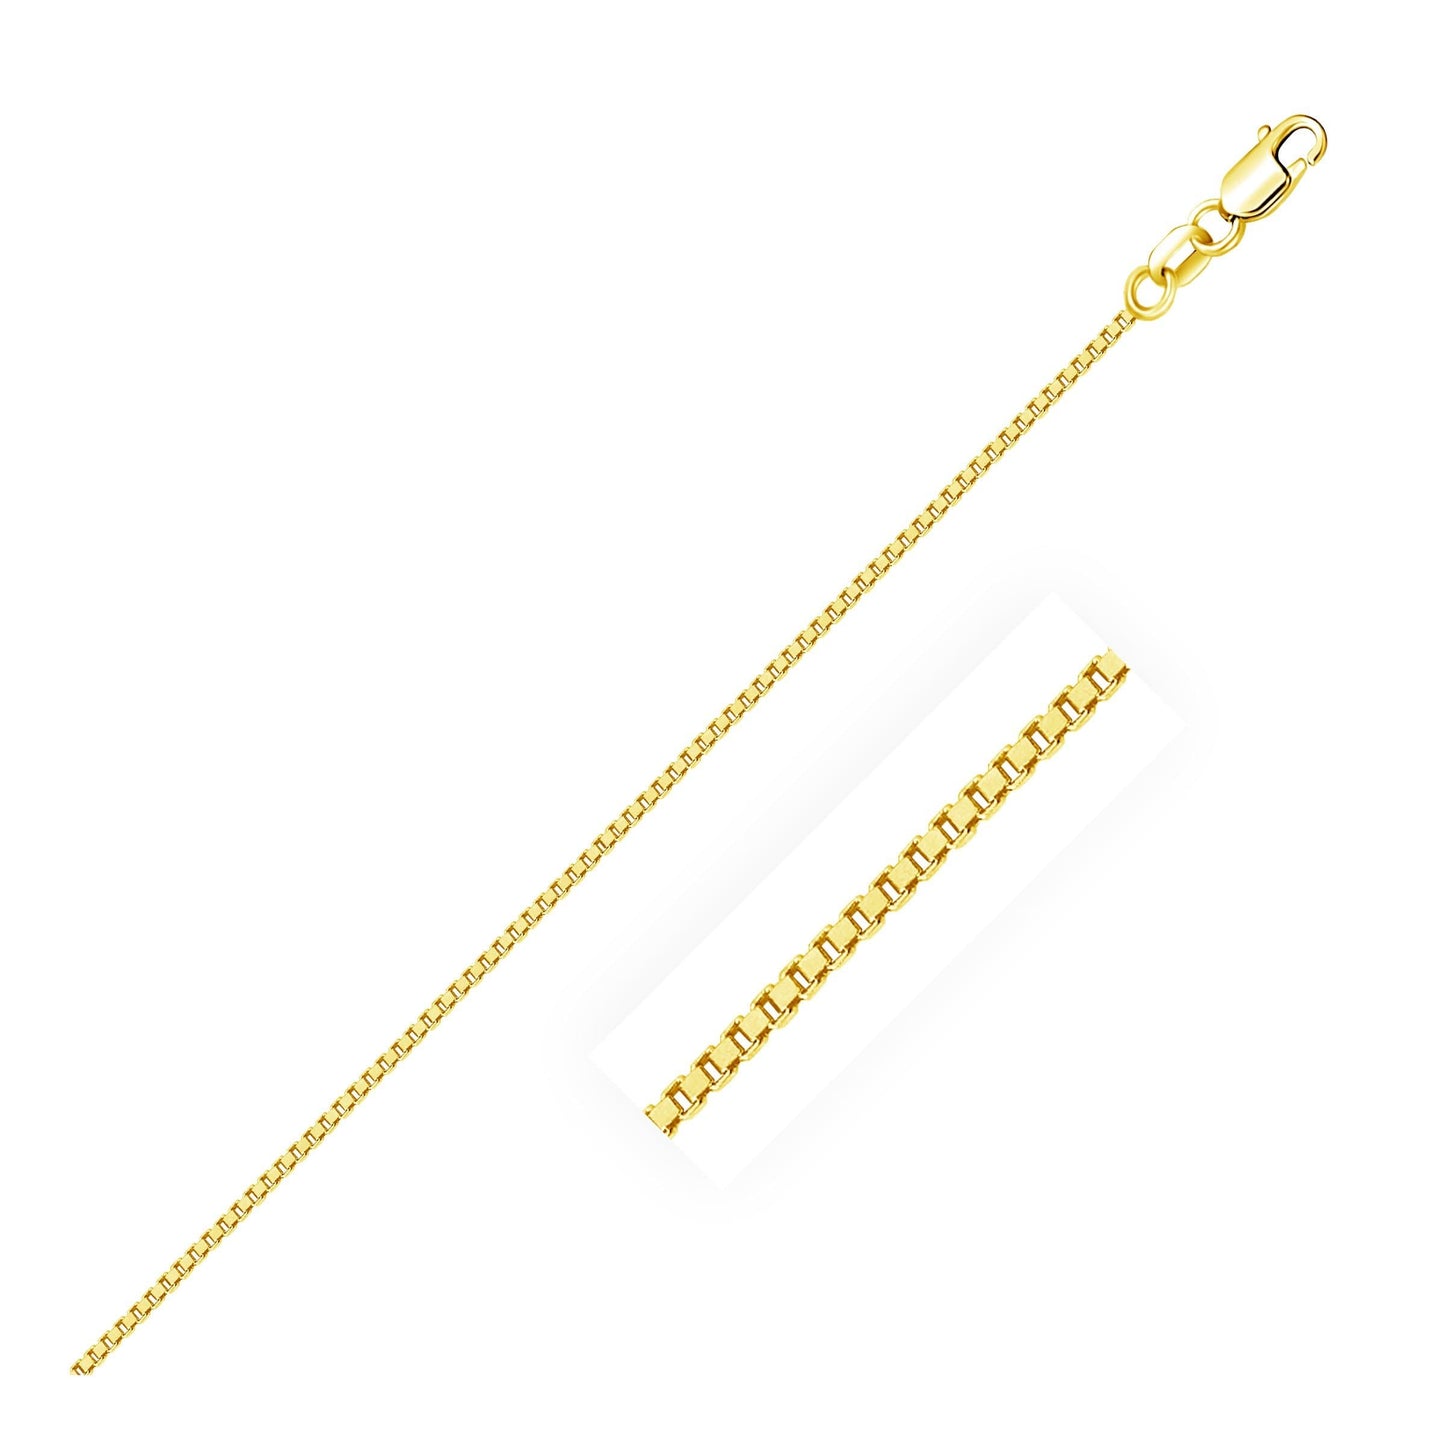 10k Yellow Gold Box Chain in 1.0 mm